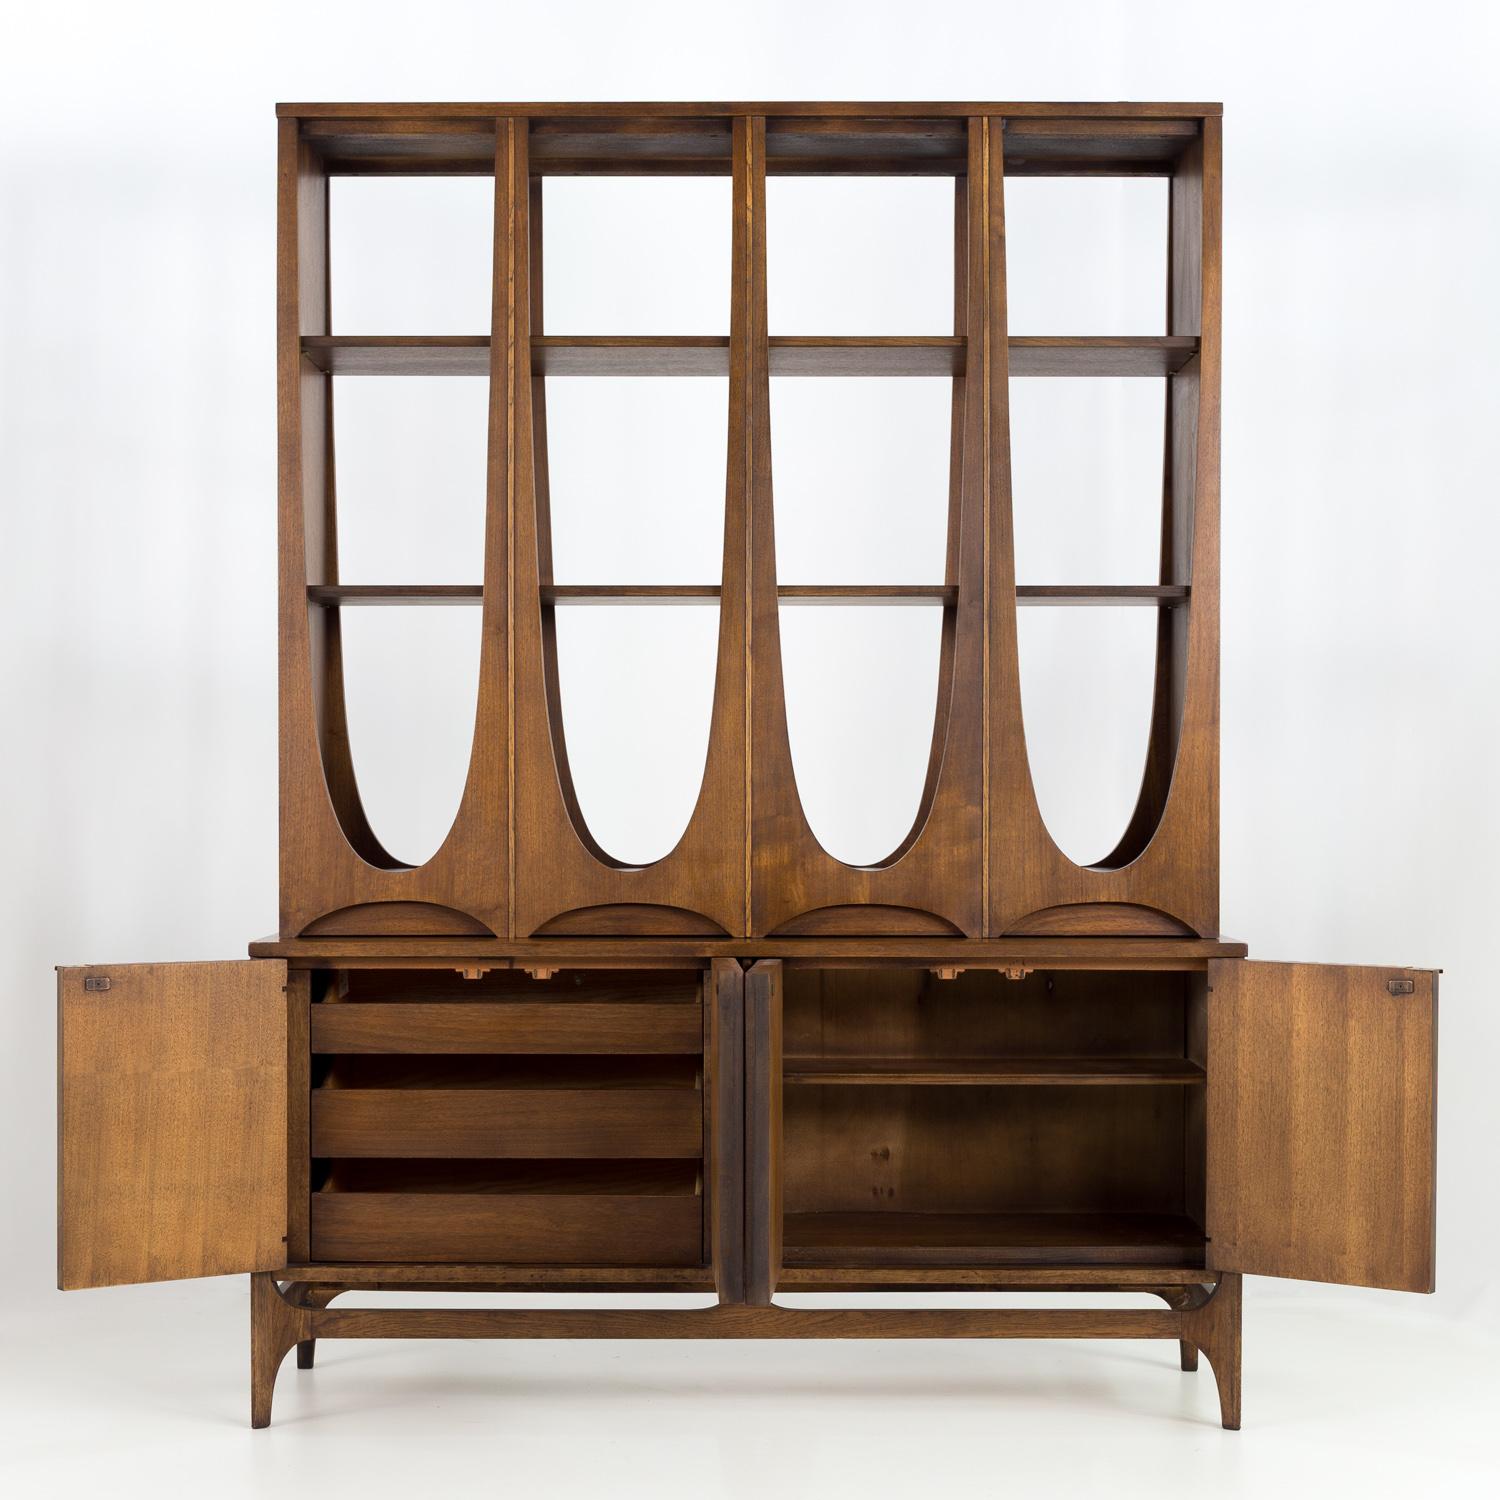 Broyhill Brasilia Mid Century Room Divider Wall Unit Shelving In Good Condition For Sale In Countryside, IL